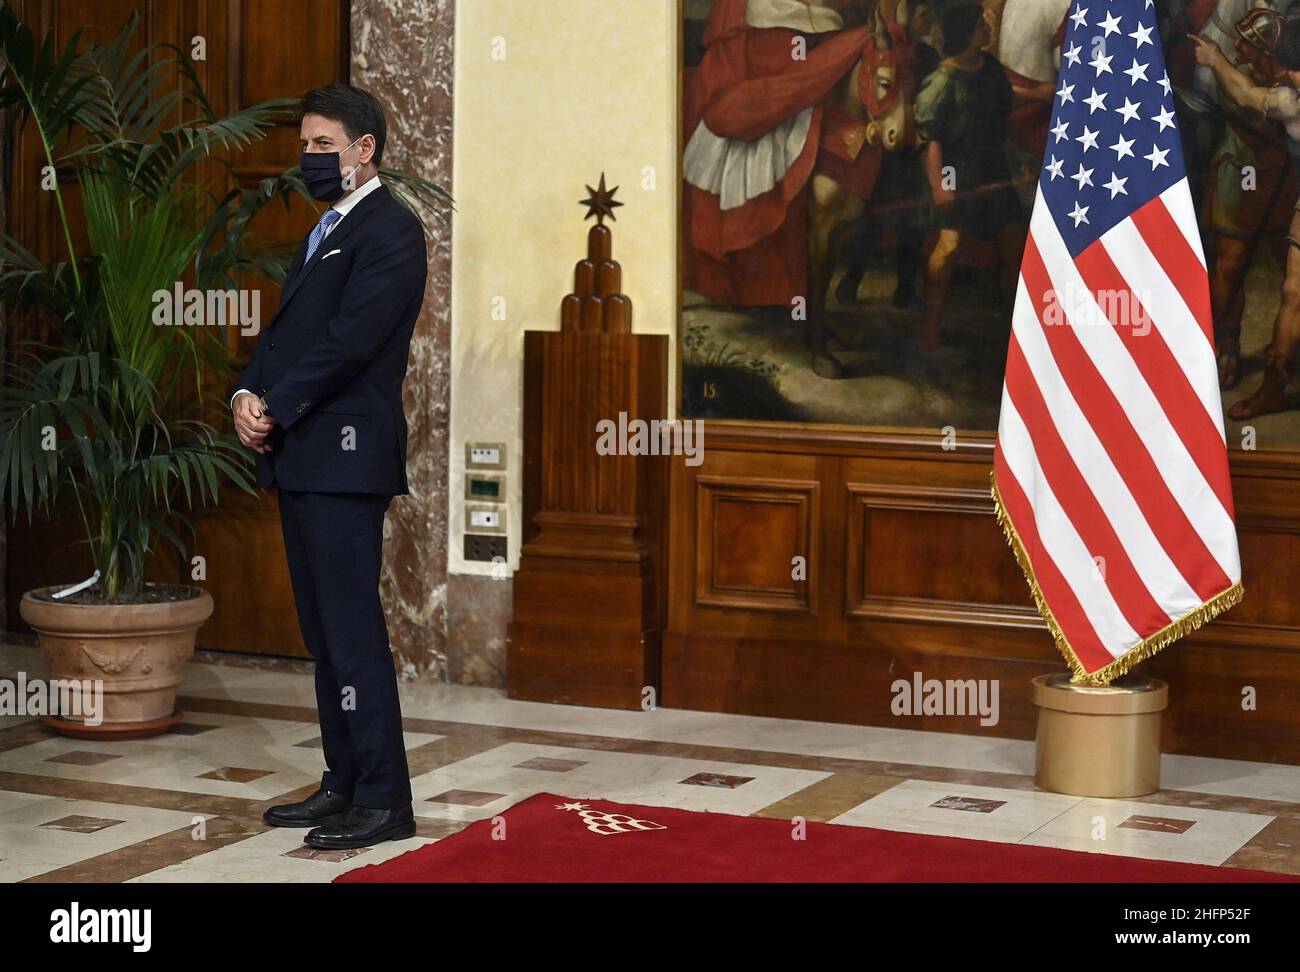 Riccardo Antimiani/LaPresse/POOL AnsaSeptember 30, 2020&#xa0; Rome, ItalyPoliticsItalian Premier Giuseppe Conte (R) and US Secretary of State Mike Pompeo (L) during their meeting at Palazzo Chigi in Rome, Italy, 30 September 2020.In the pic Giuseppe Conte Stock Photo